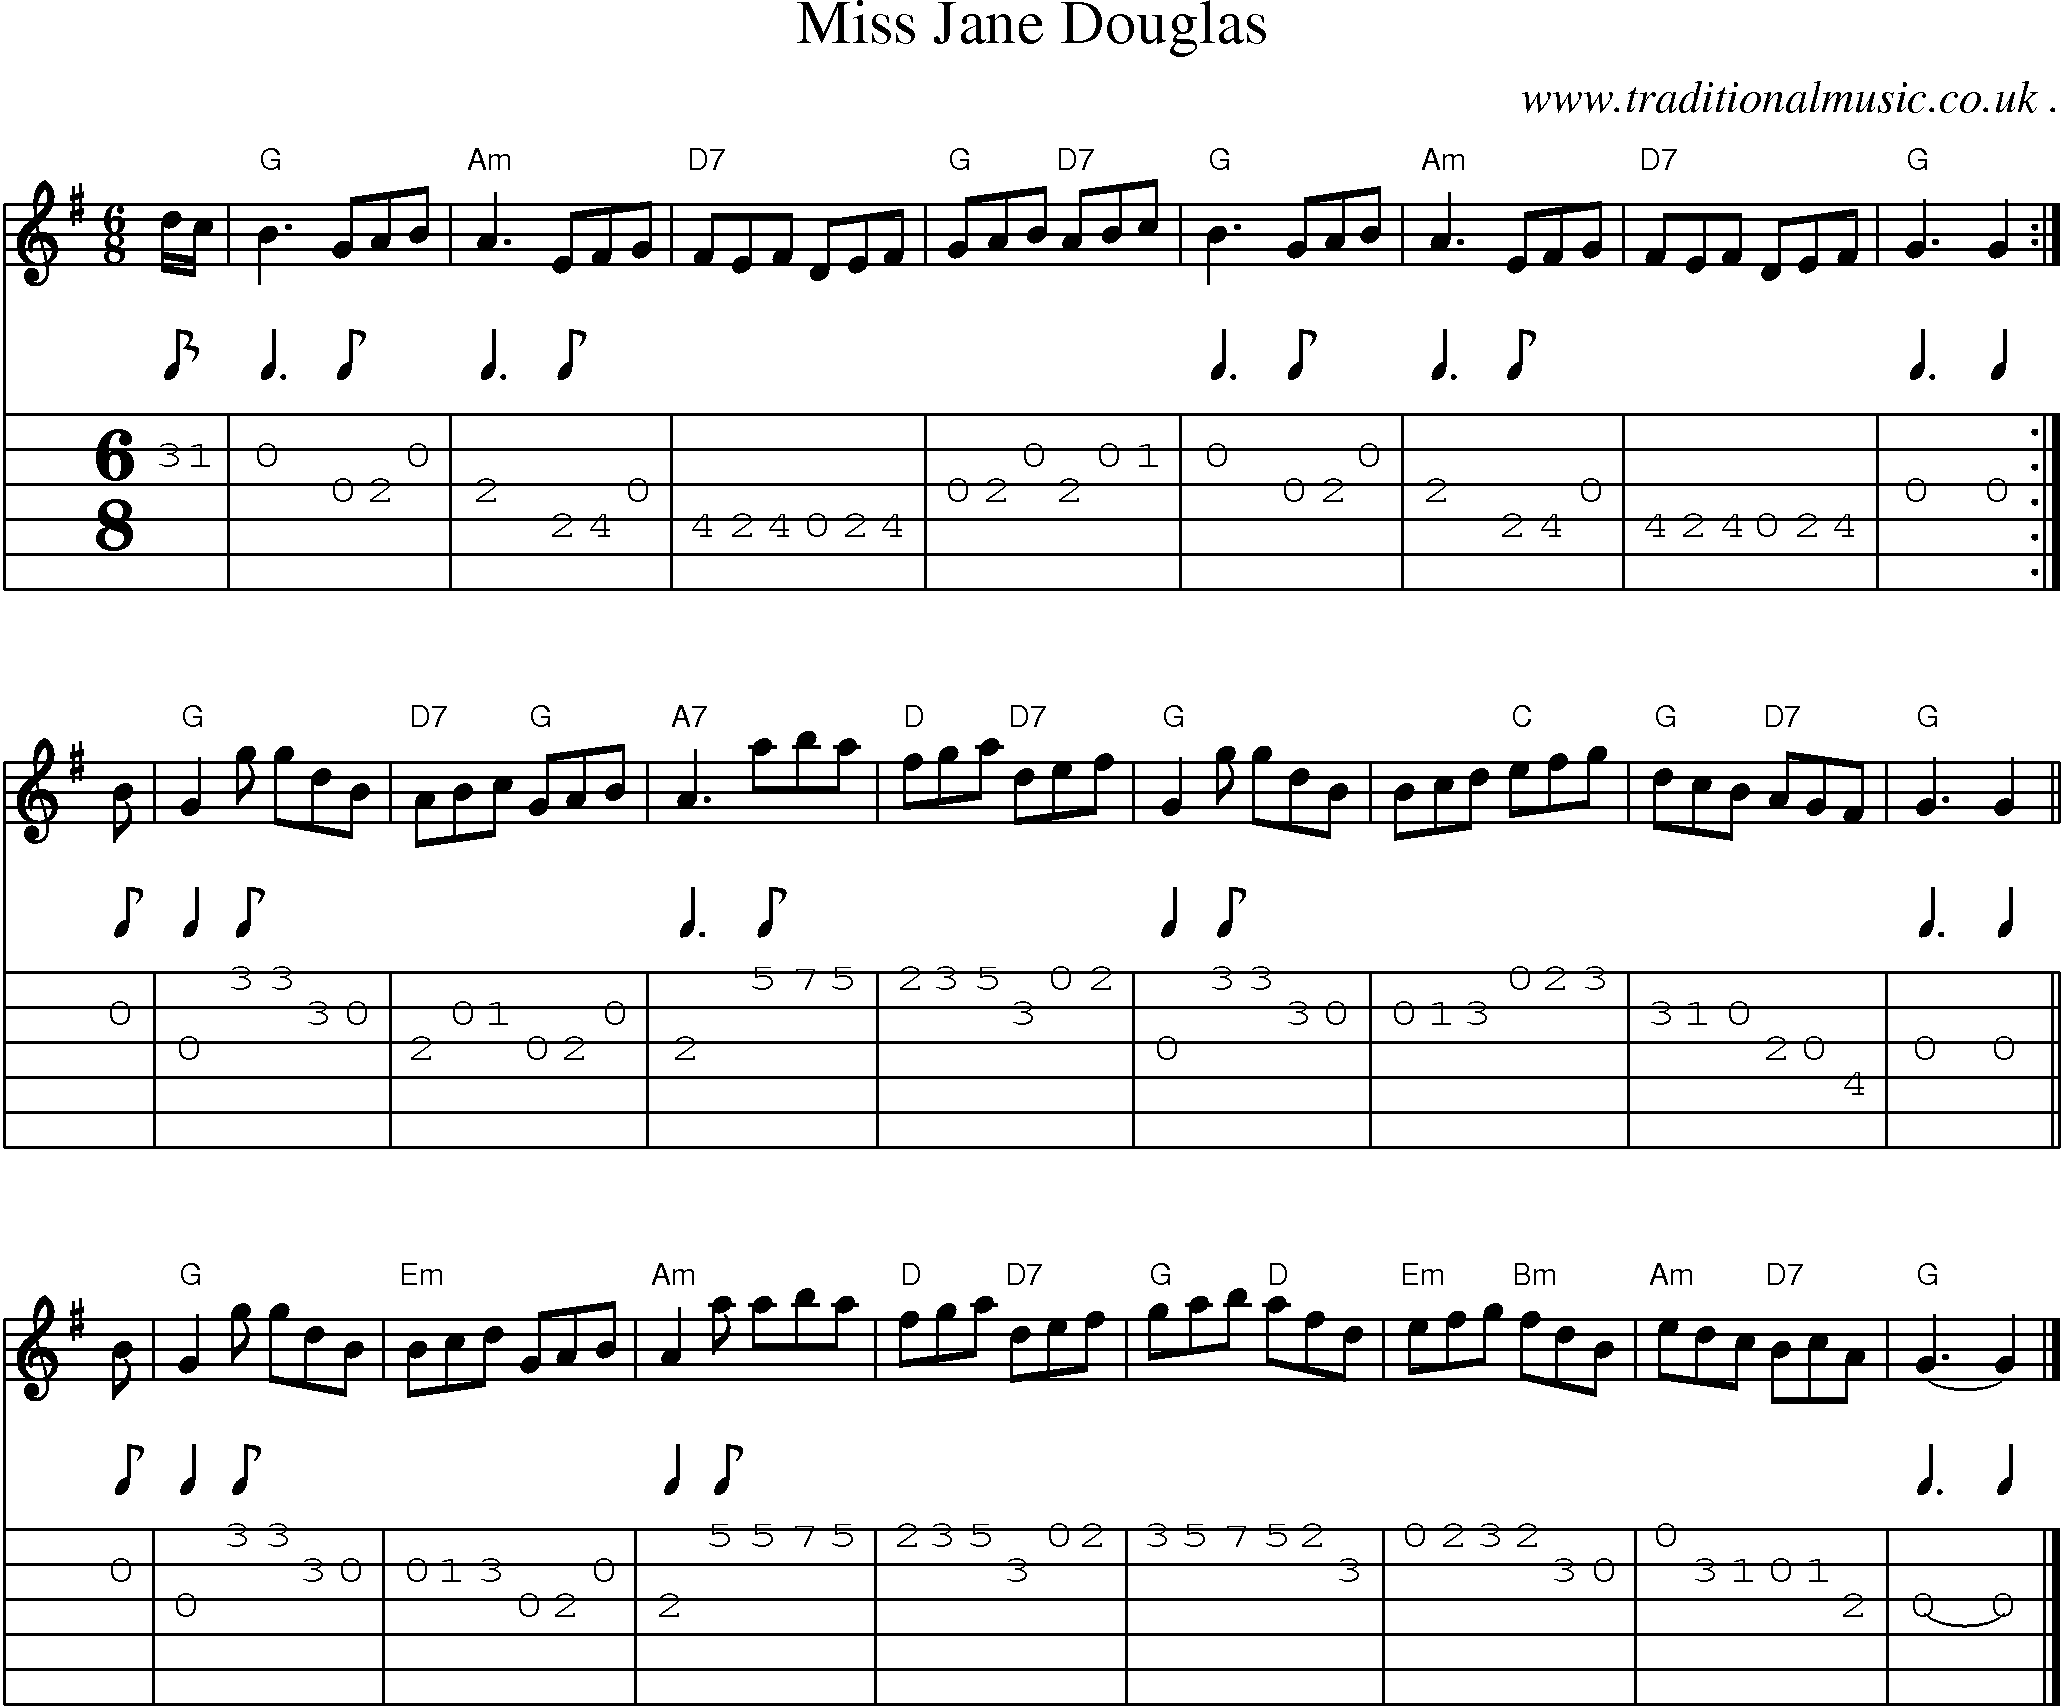 Sheet-music  score, Chords and Guitar Tabs for Miss Jane Douglas